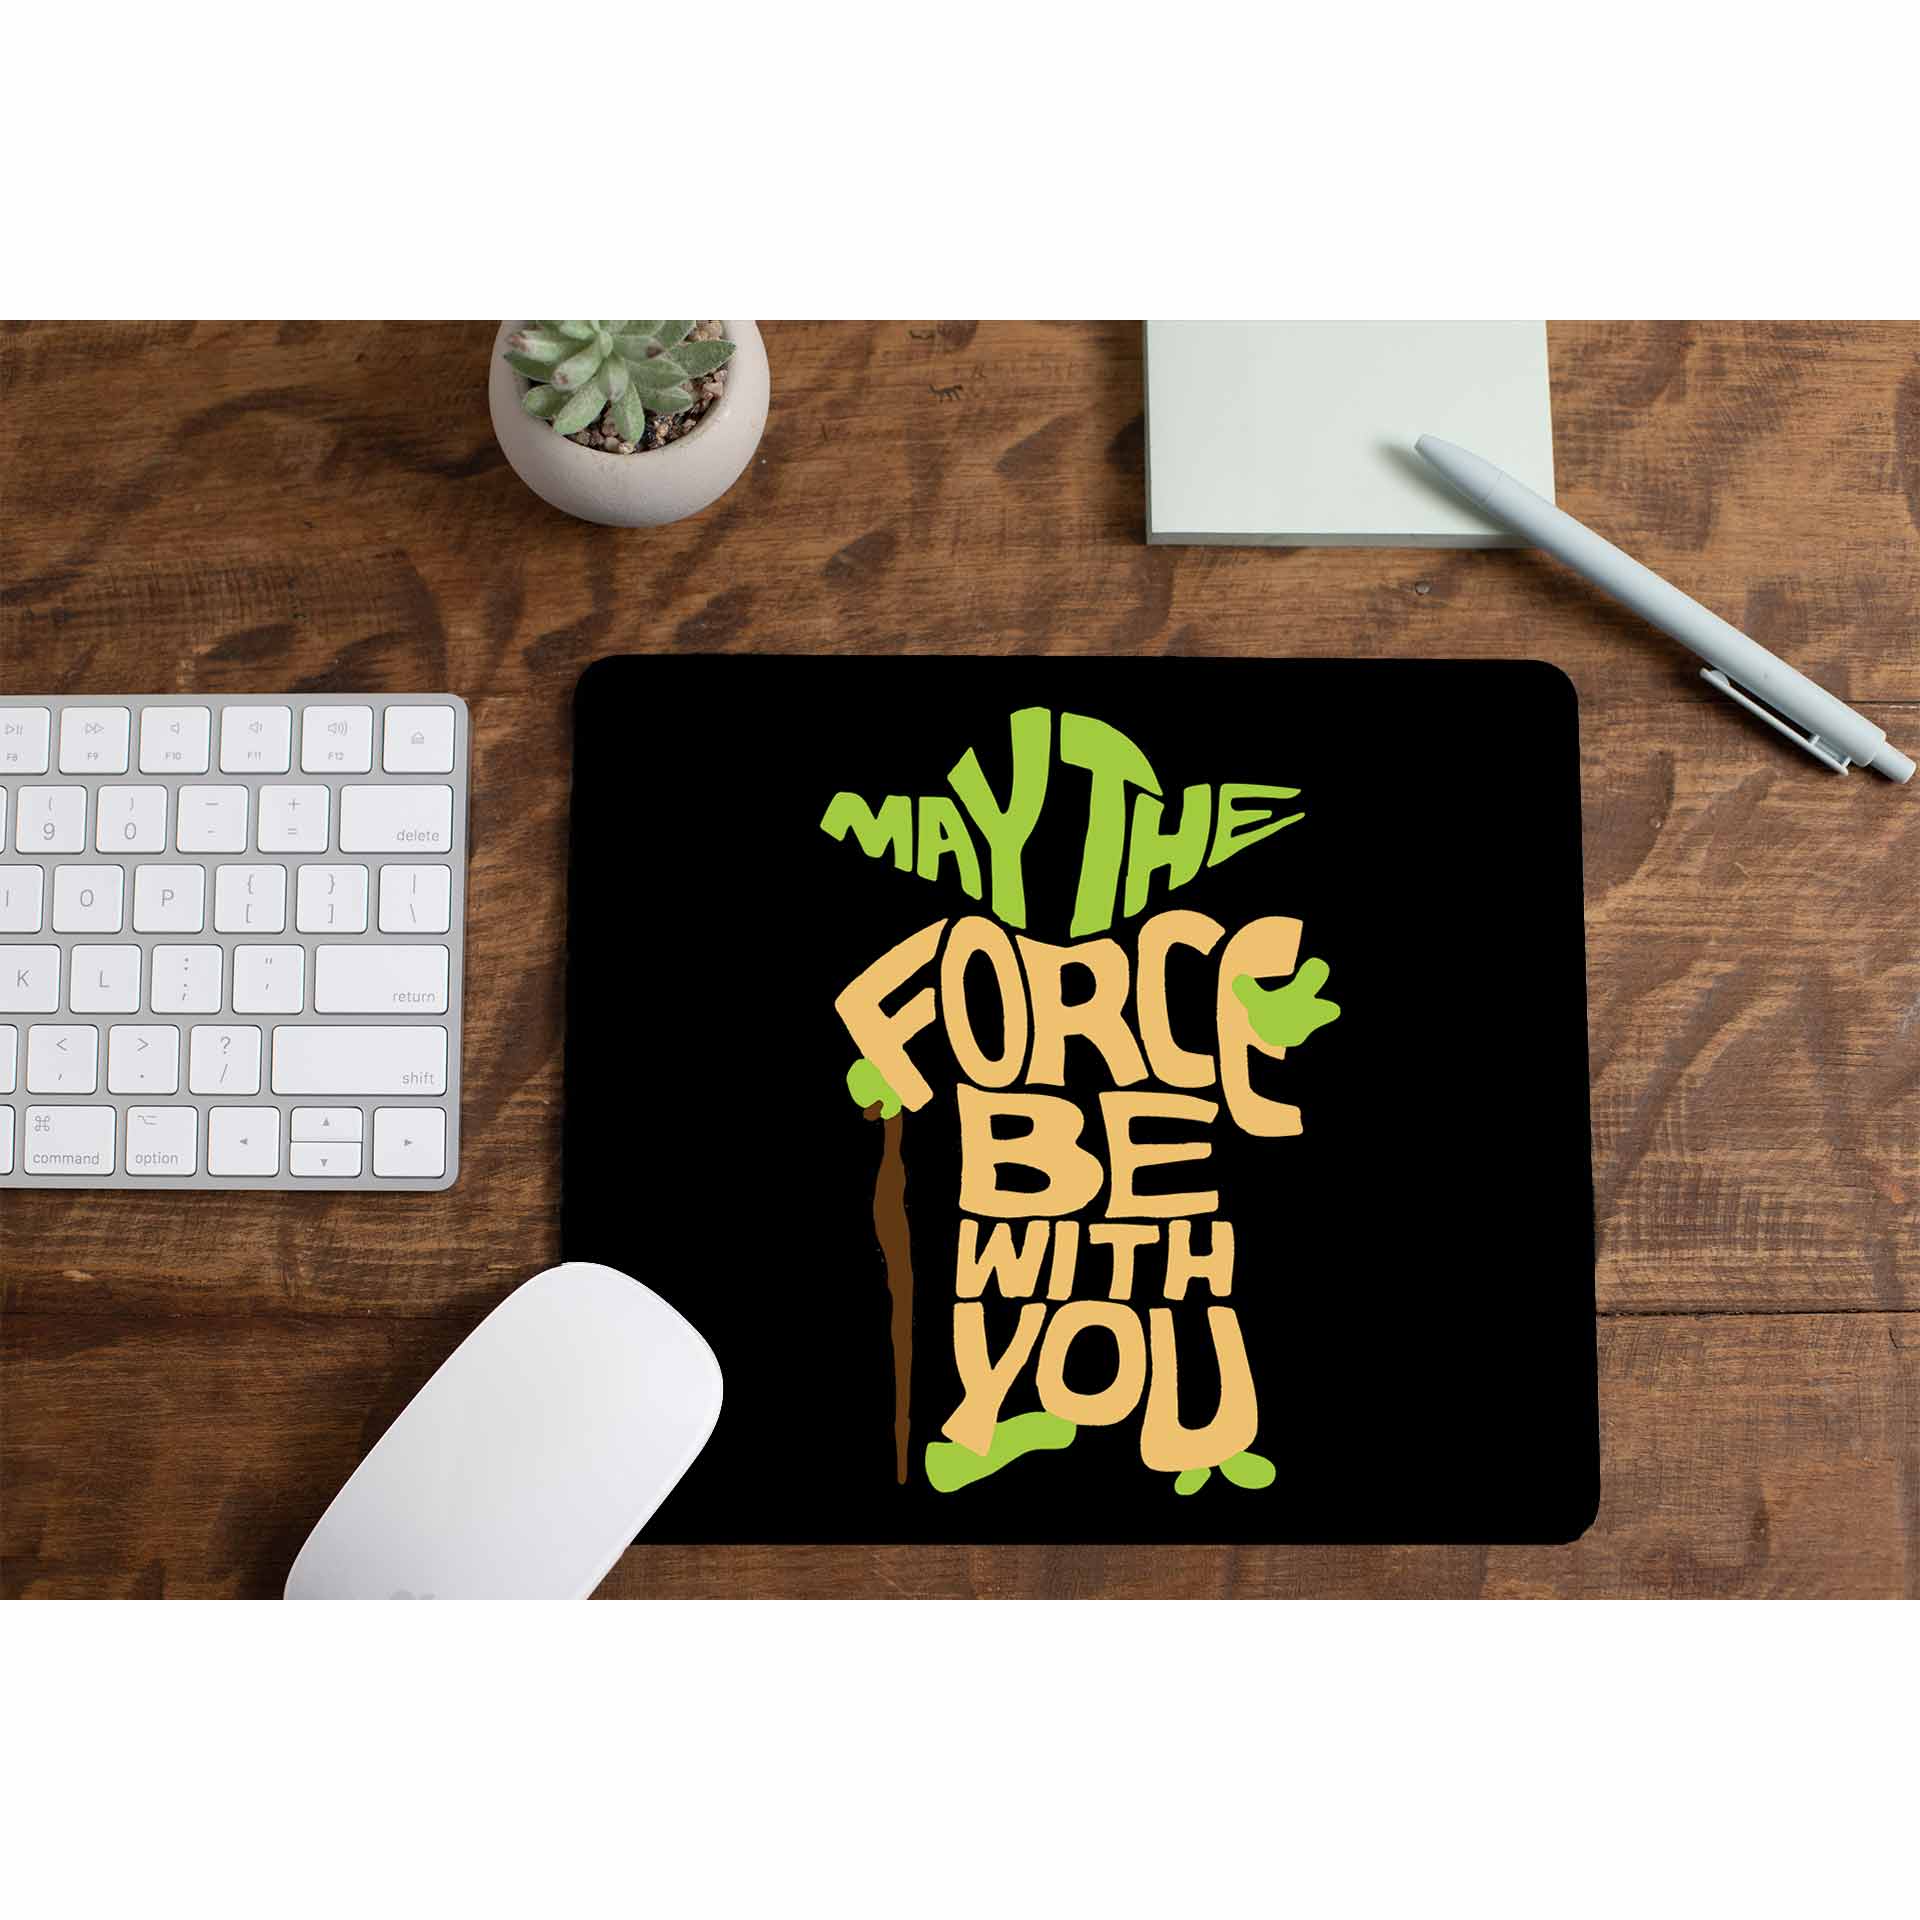 star wars may the force be with you mousepad logitech large anime tv & movies buy online india the banyan tee tbt men women girls boys unisex  yoda